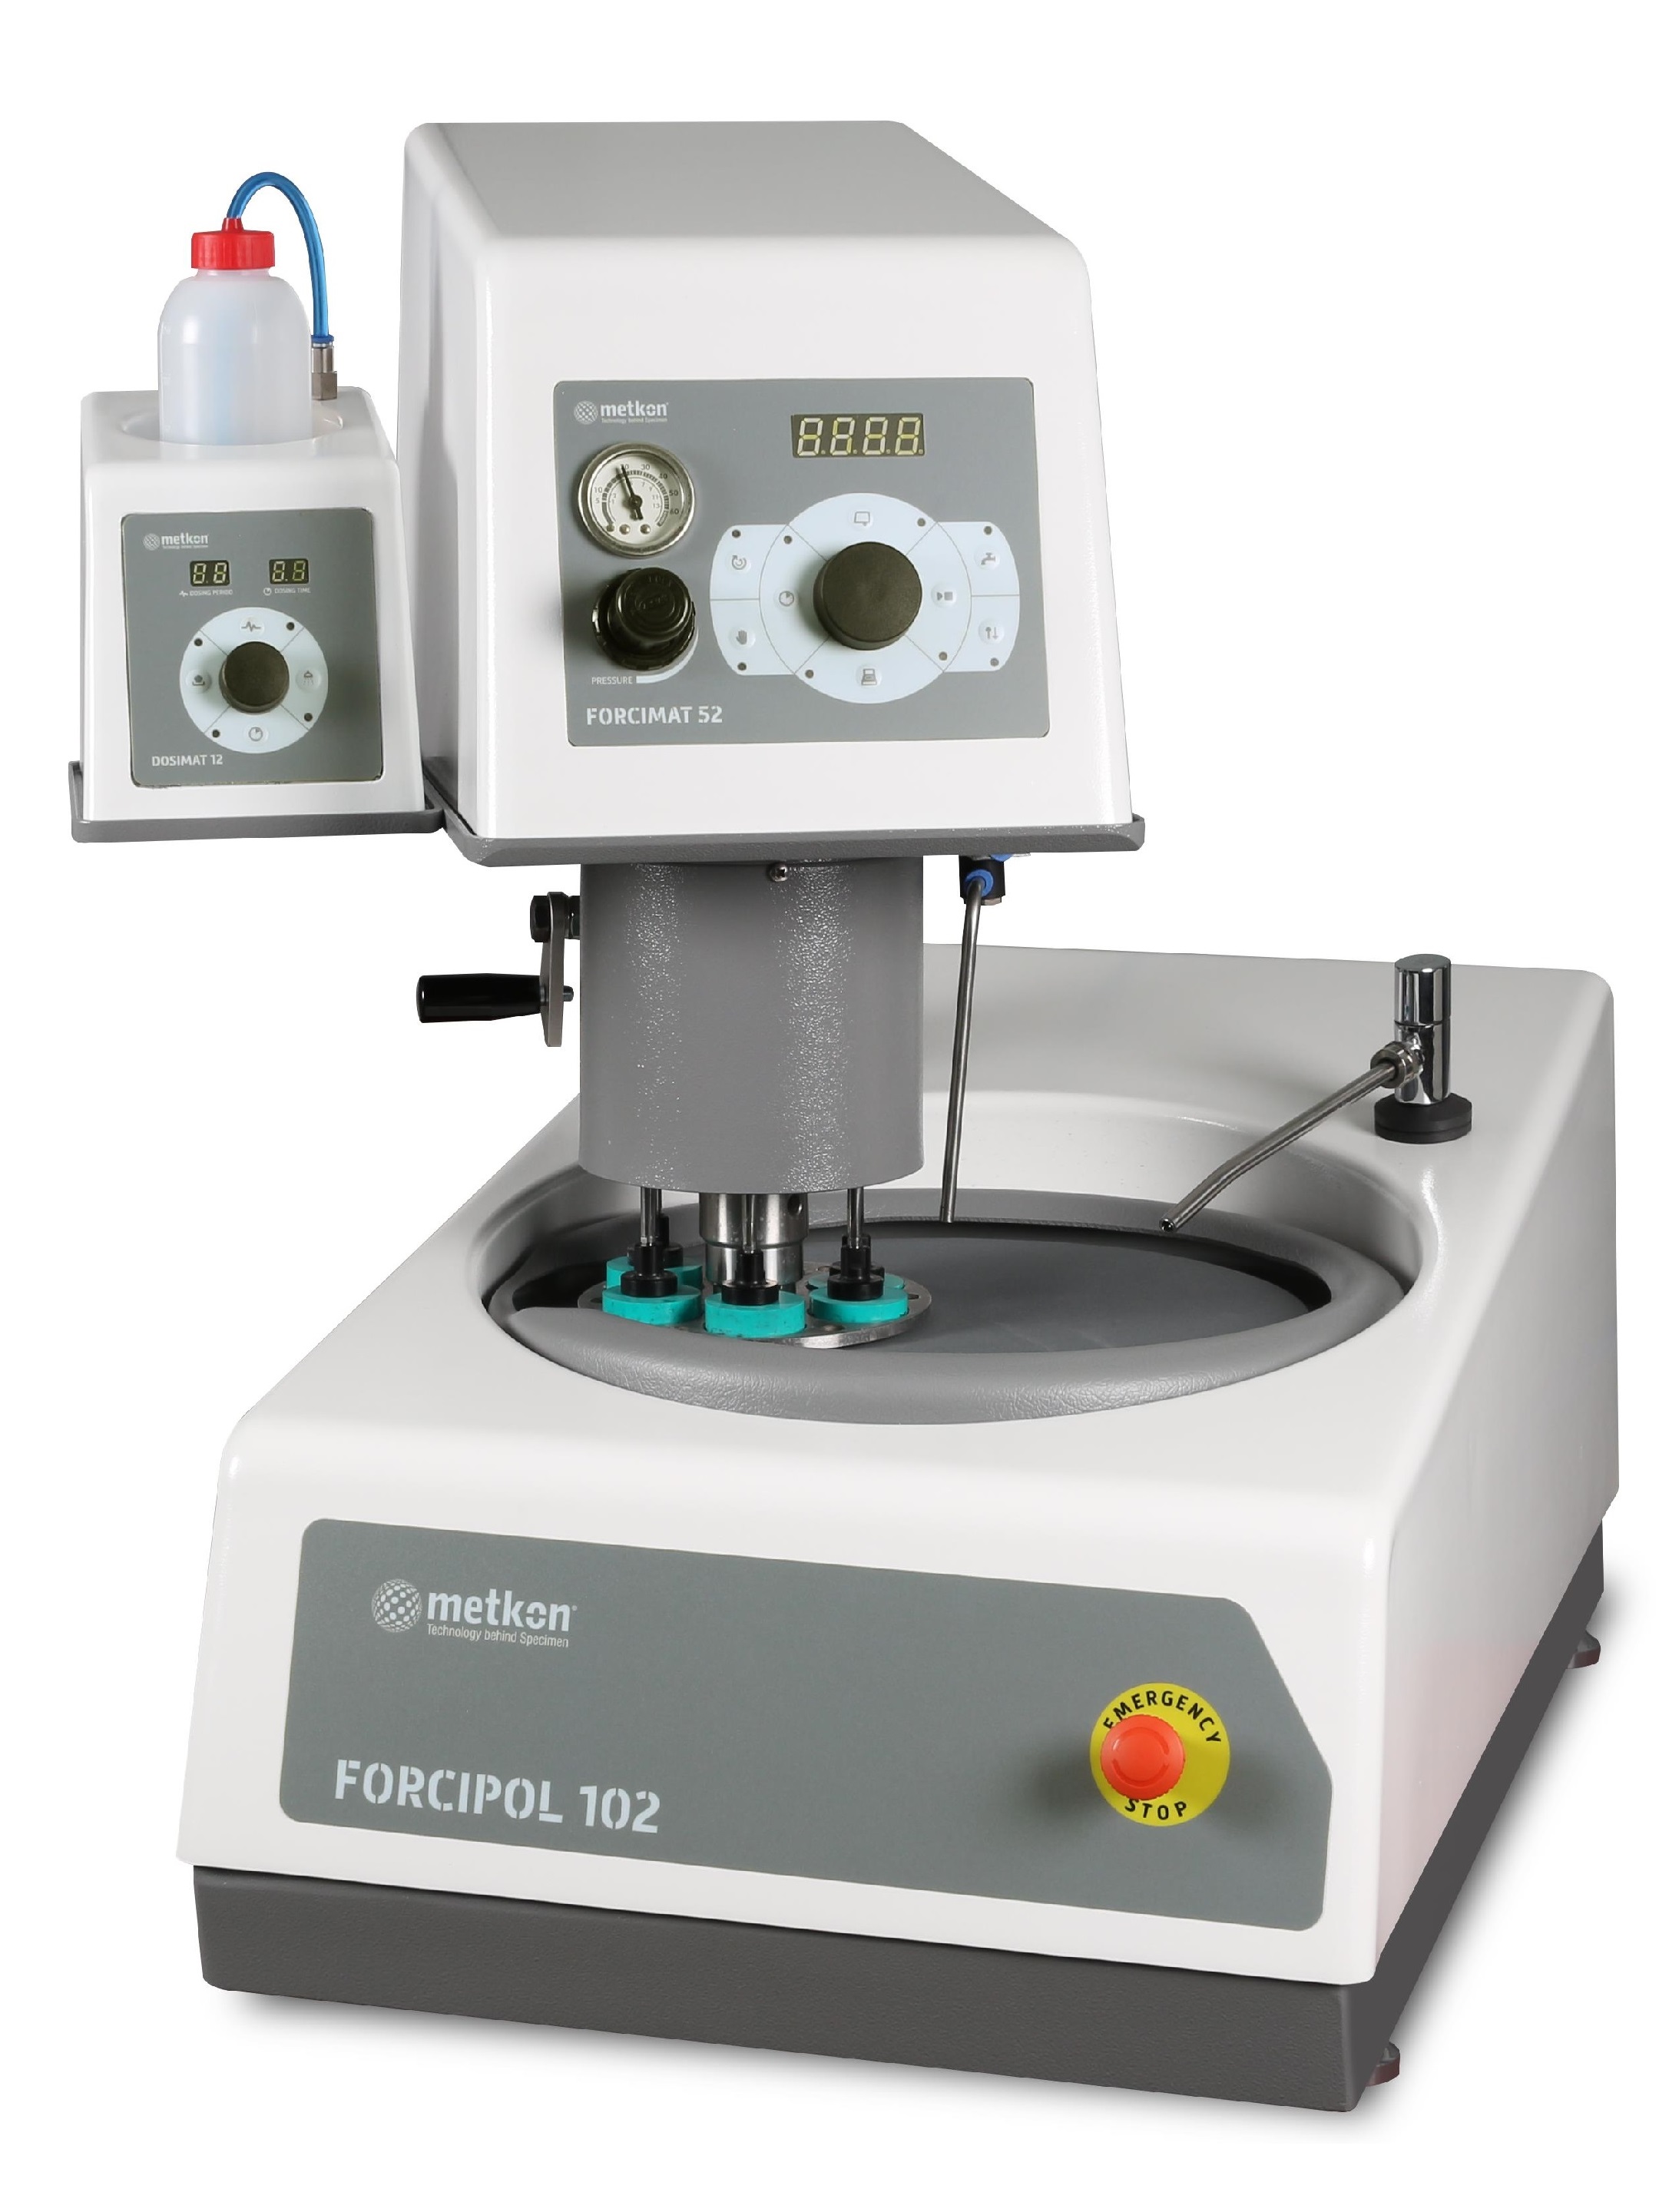 FORCIPOL + FORIMAT FORCIPOL Basis- Schleifmaschine Poliermaschine Metallographie